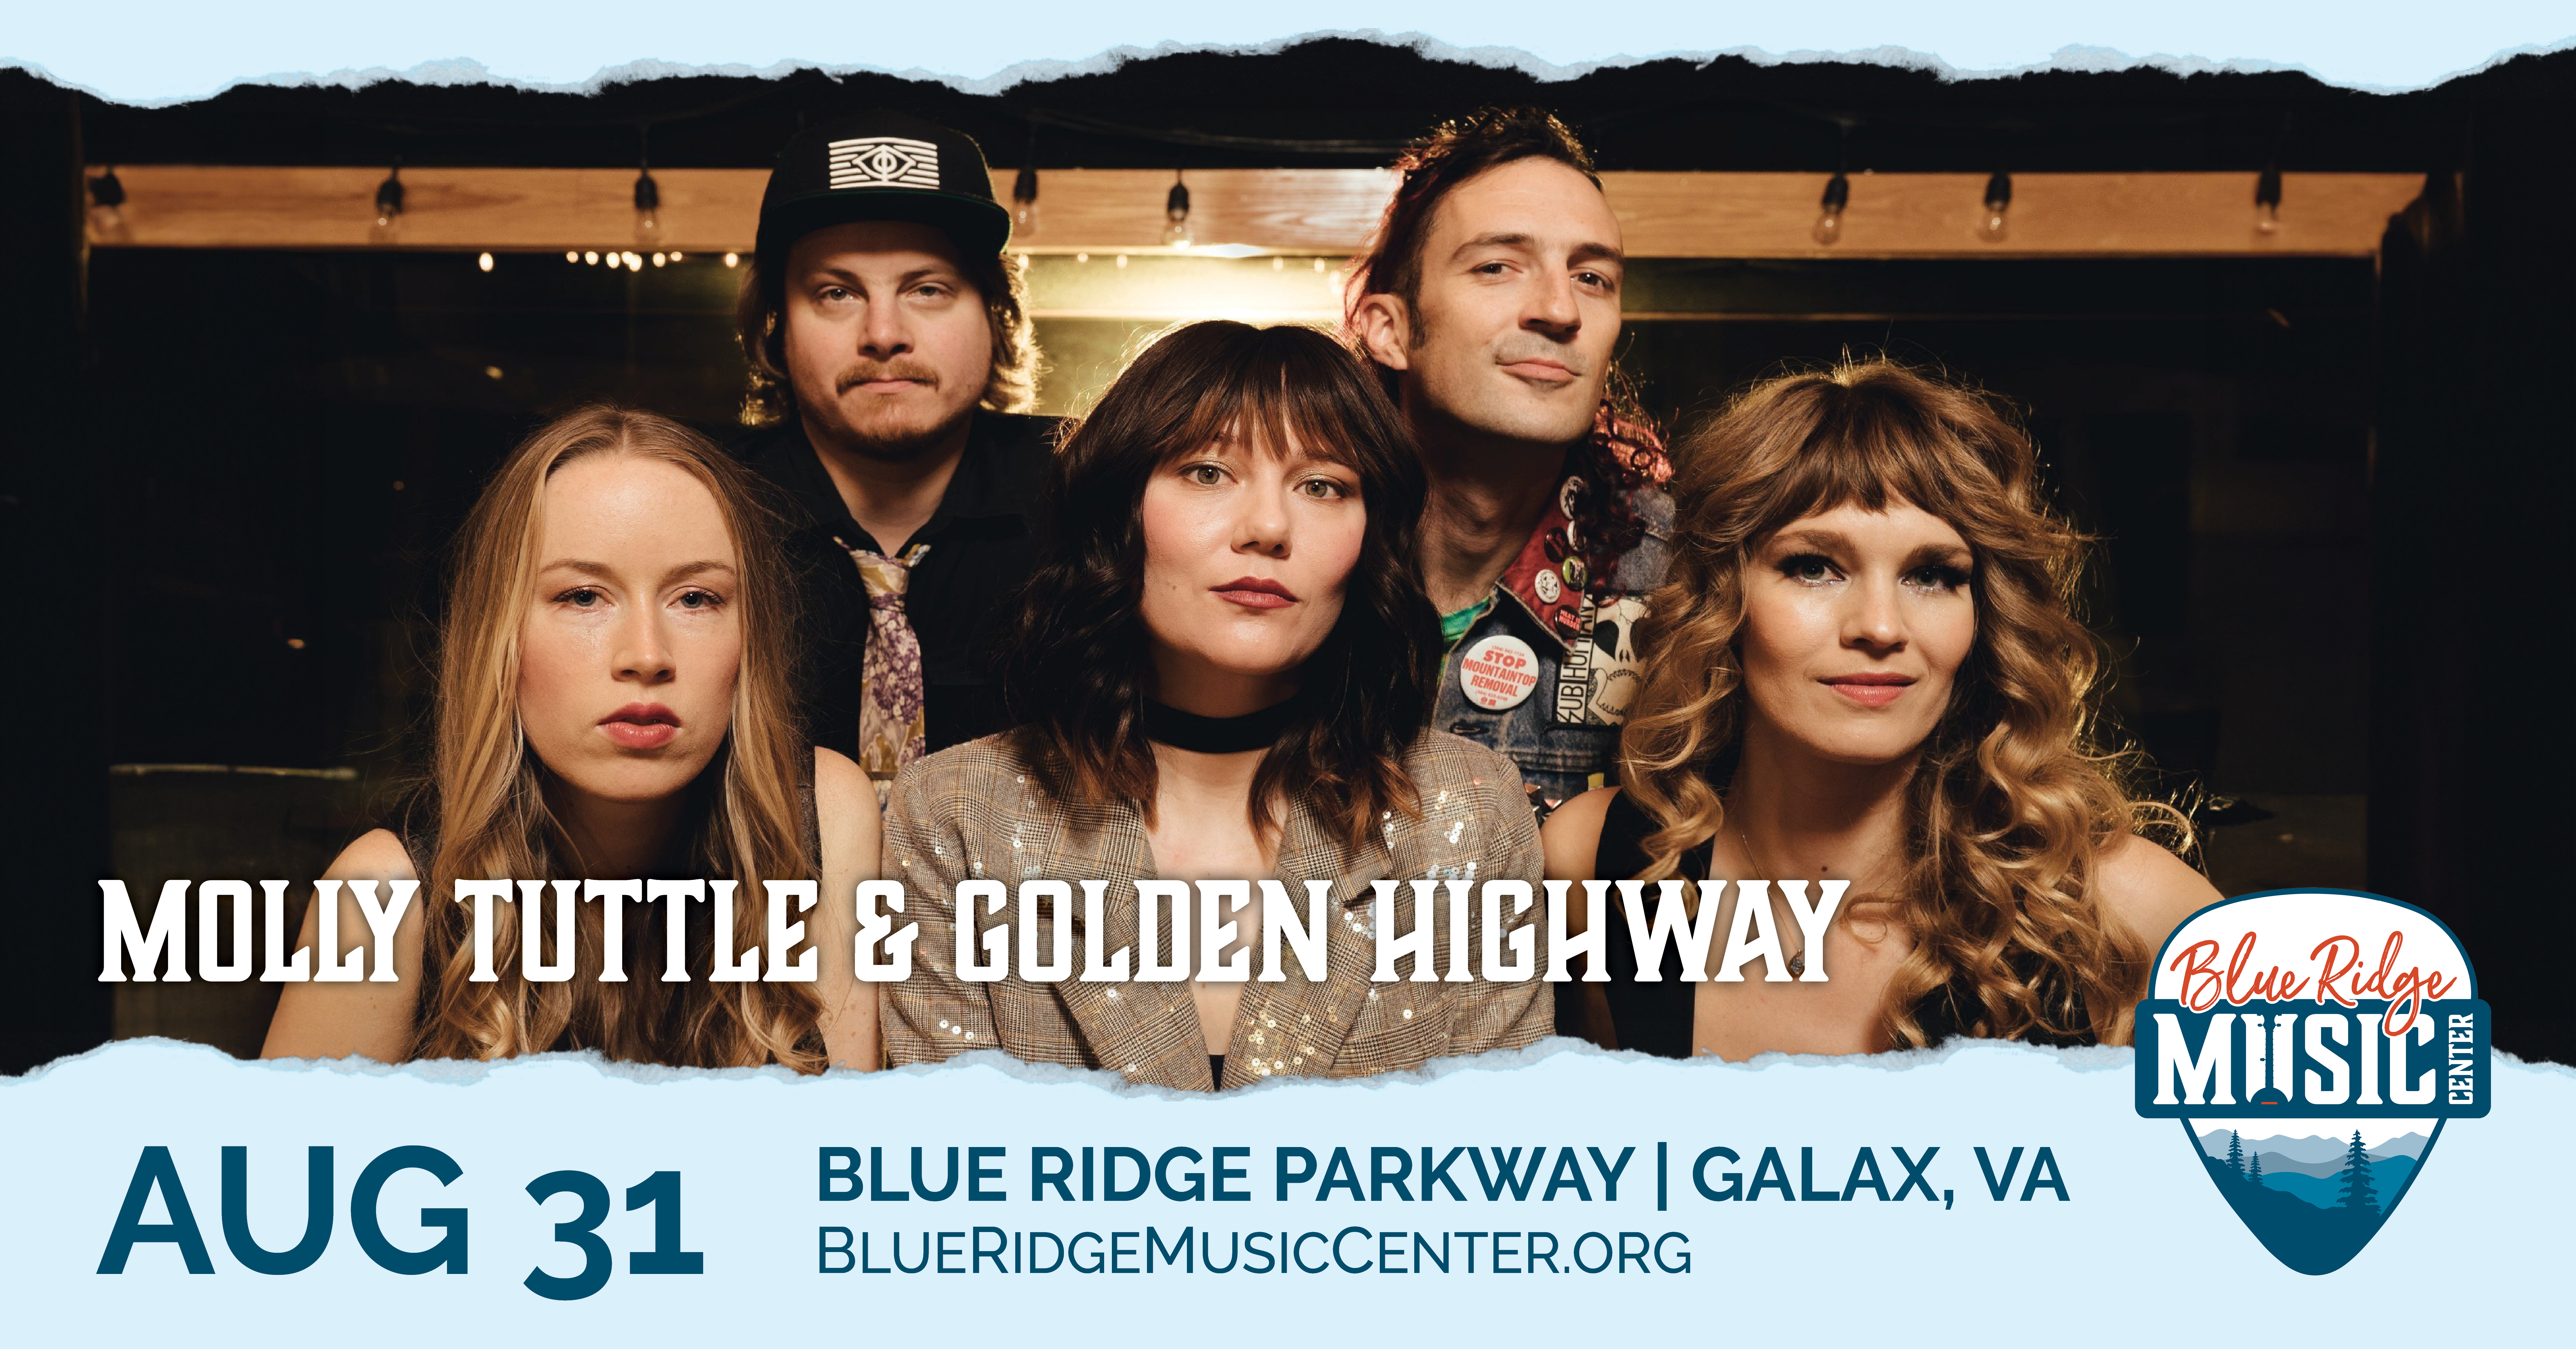 Molly Tuttle & Golden Highway at the Blue Ridge Music Center